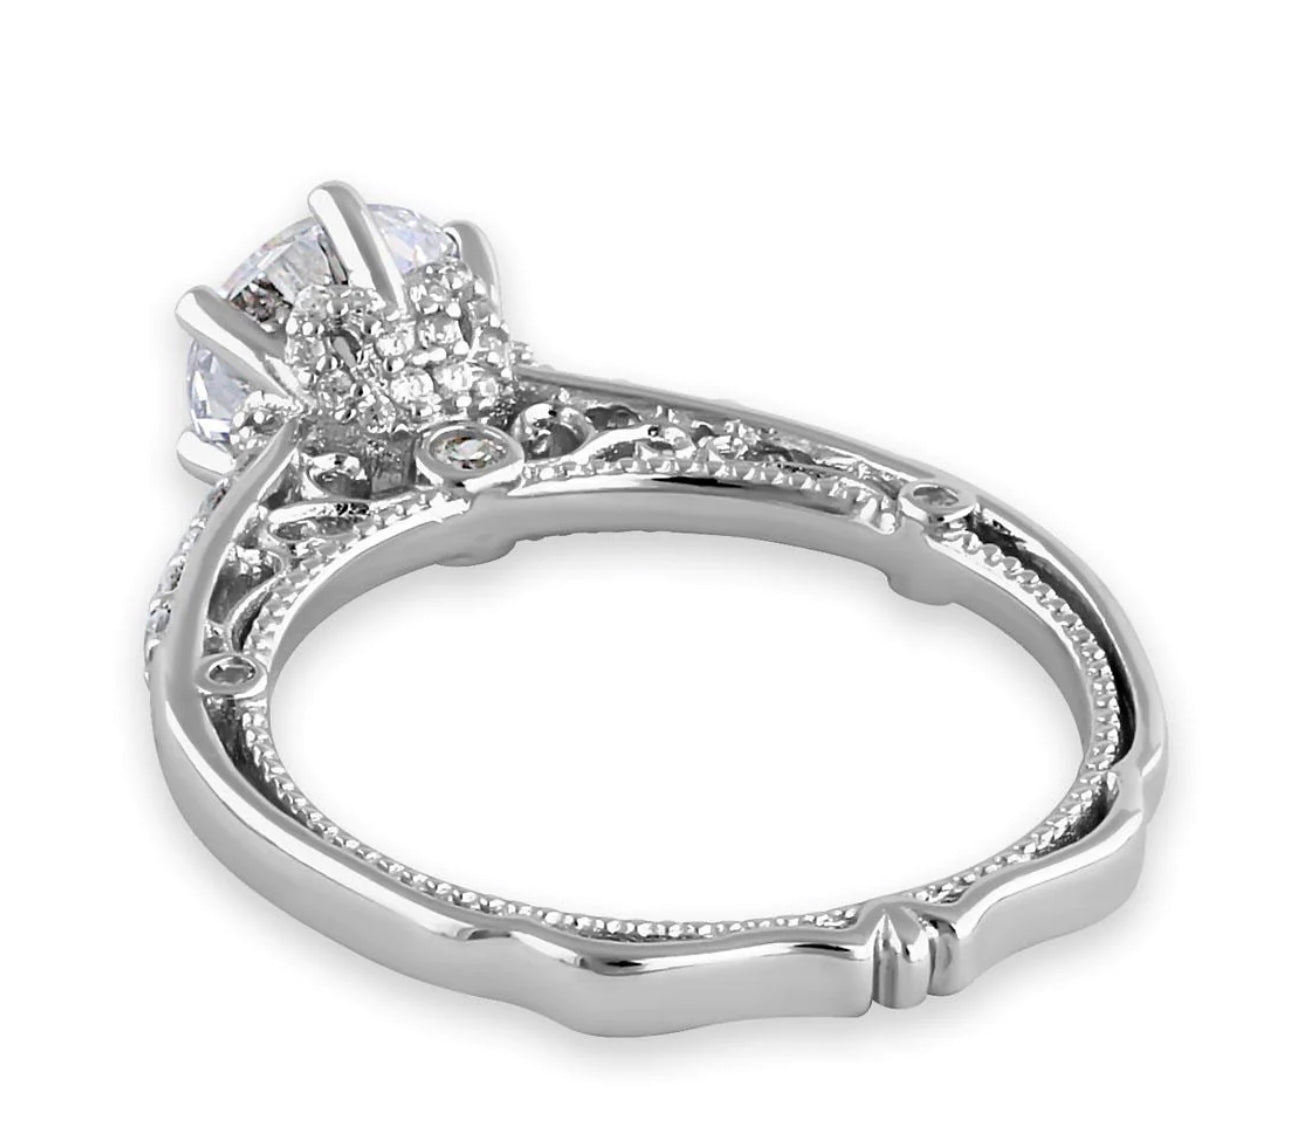 Unique Vintage Diamond Engagement Rings  - every girls loves sparkles